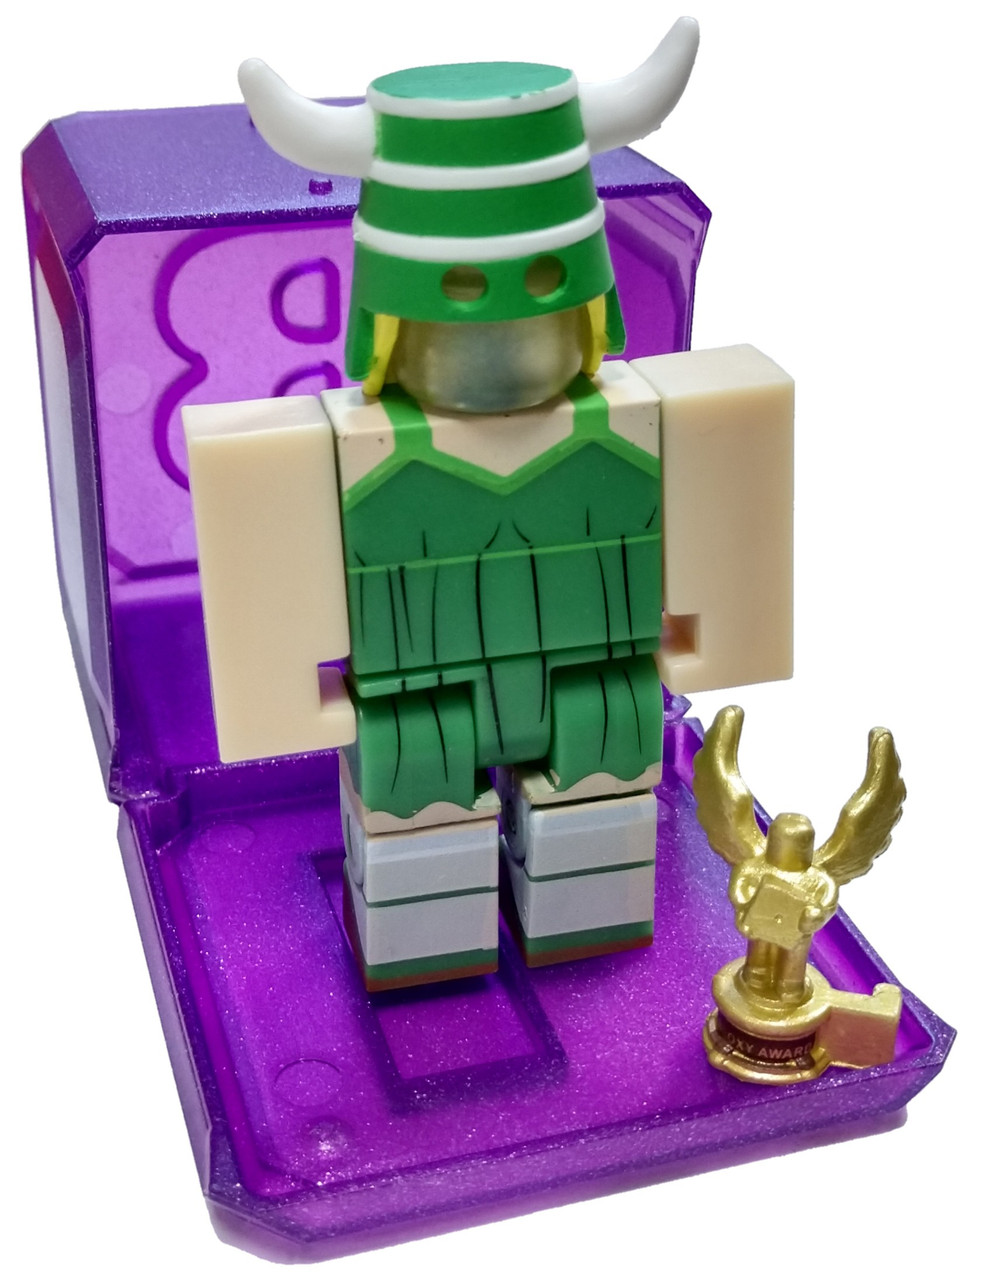 Roblox Celebrity Collection Series 3 Missshu 3 Mini Figure With Cube And Online Code Loose Jazwares Toywiz - details about roblox series 5 white collar dog mini figure